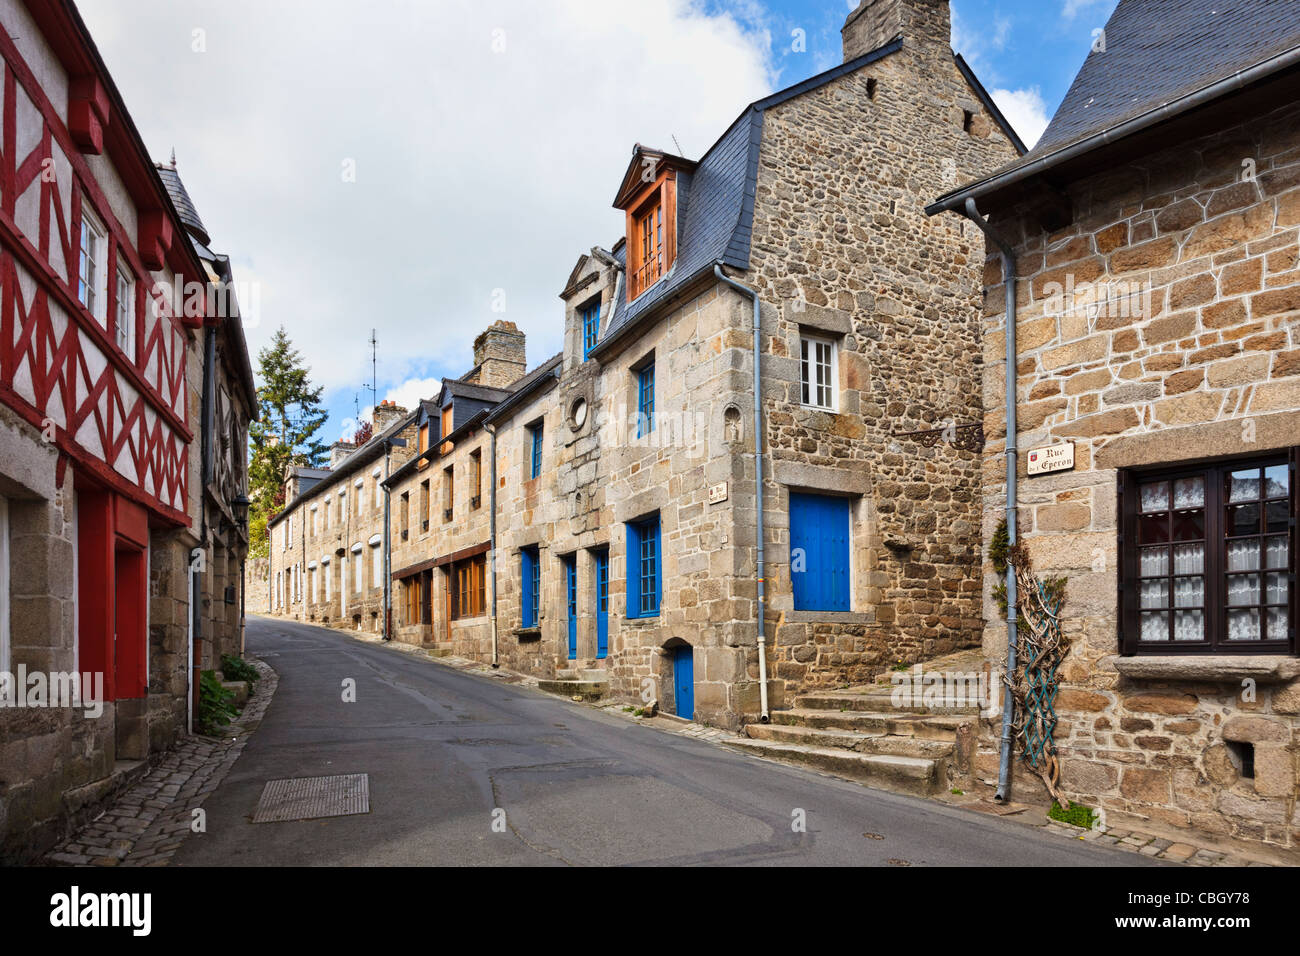 Brittany - Old medieval street in Moncontour, Cotes d'Armor, Brittany, France Stock Photo